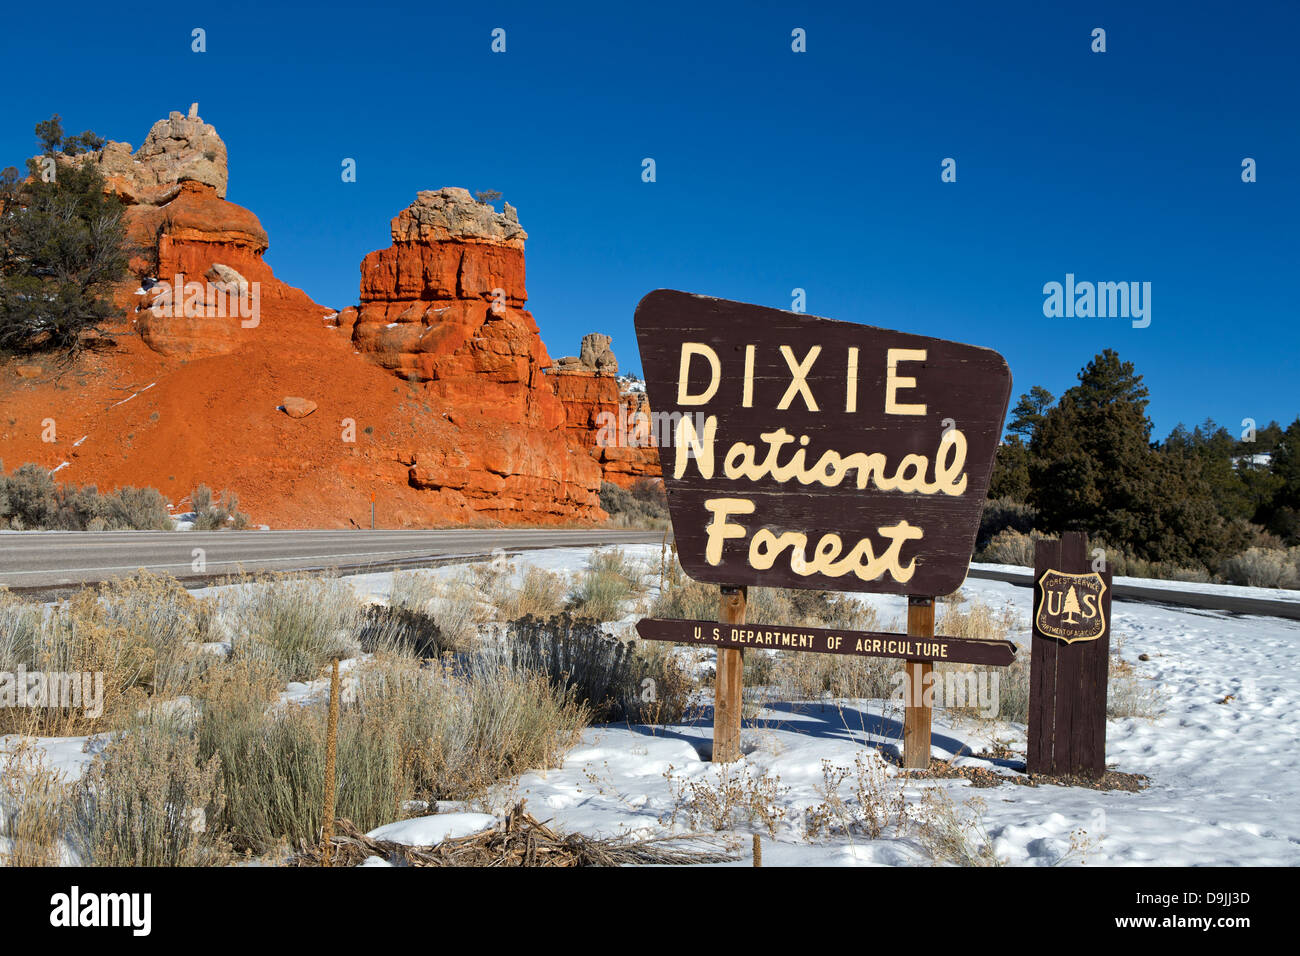 Red Canyon area of Dixie National Forest, Utah Scenic Highway 12, near Bryce Canyon National Park, Utah, United States of America Stock Photo